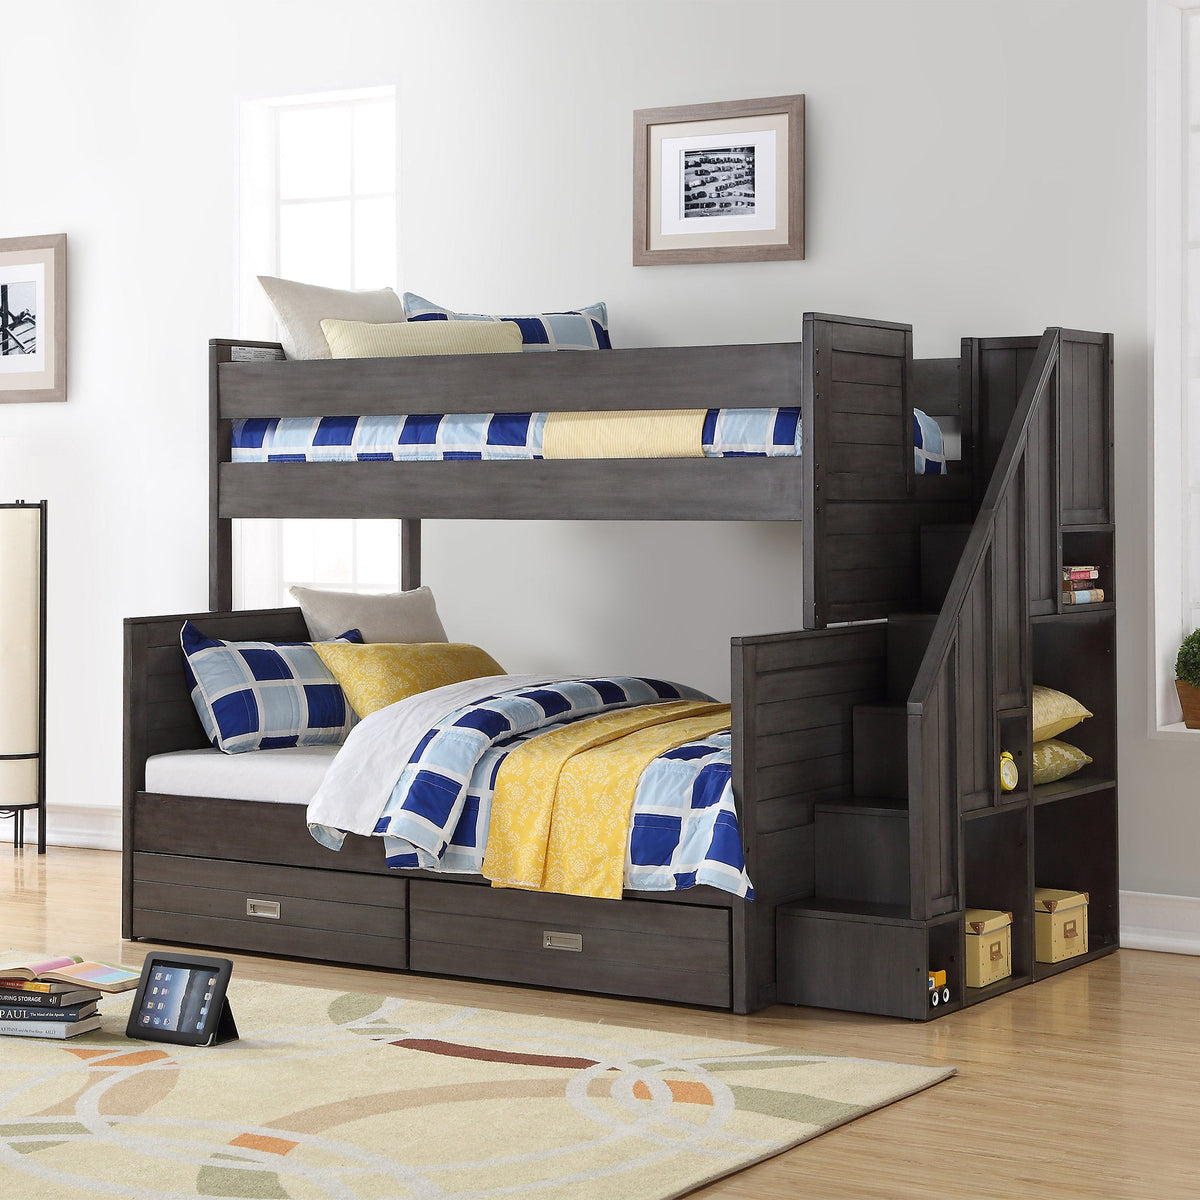 Caramia Kids Dylan Twin over Full Bunk Bed Image